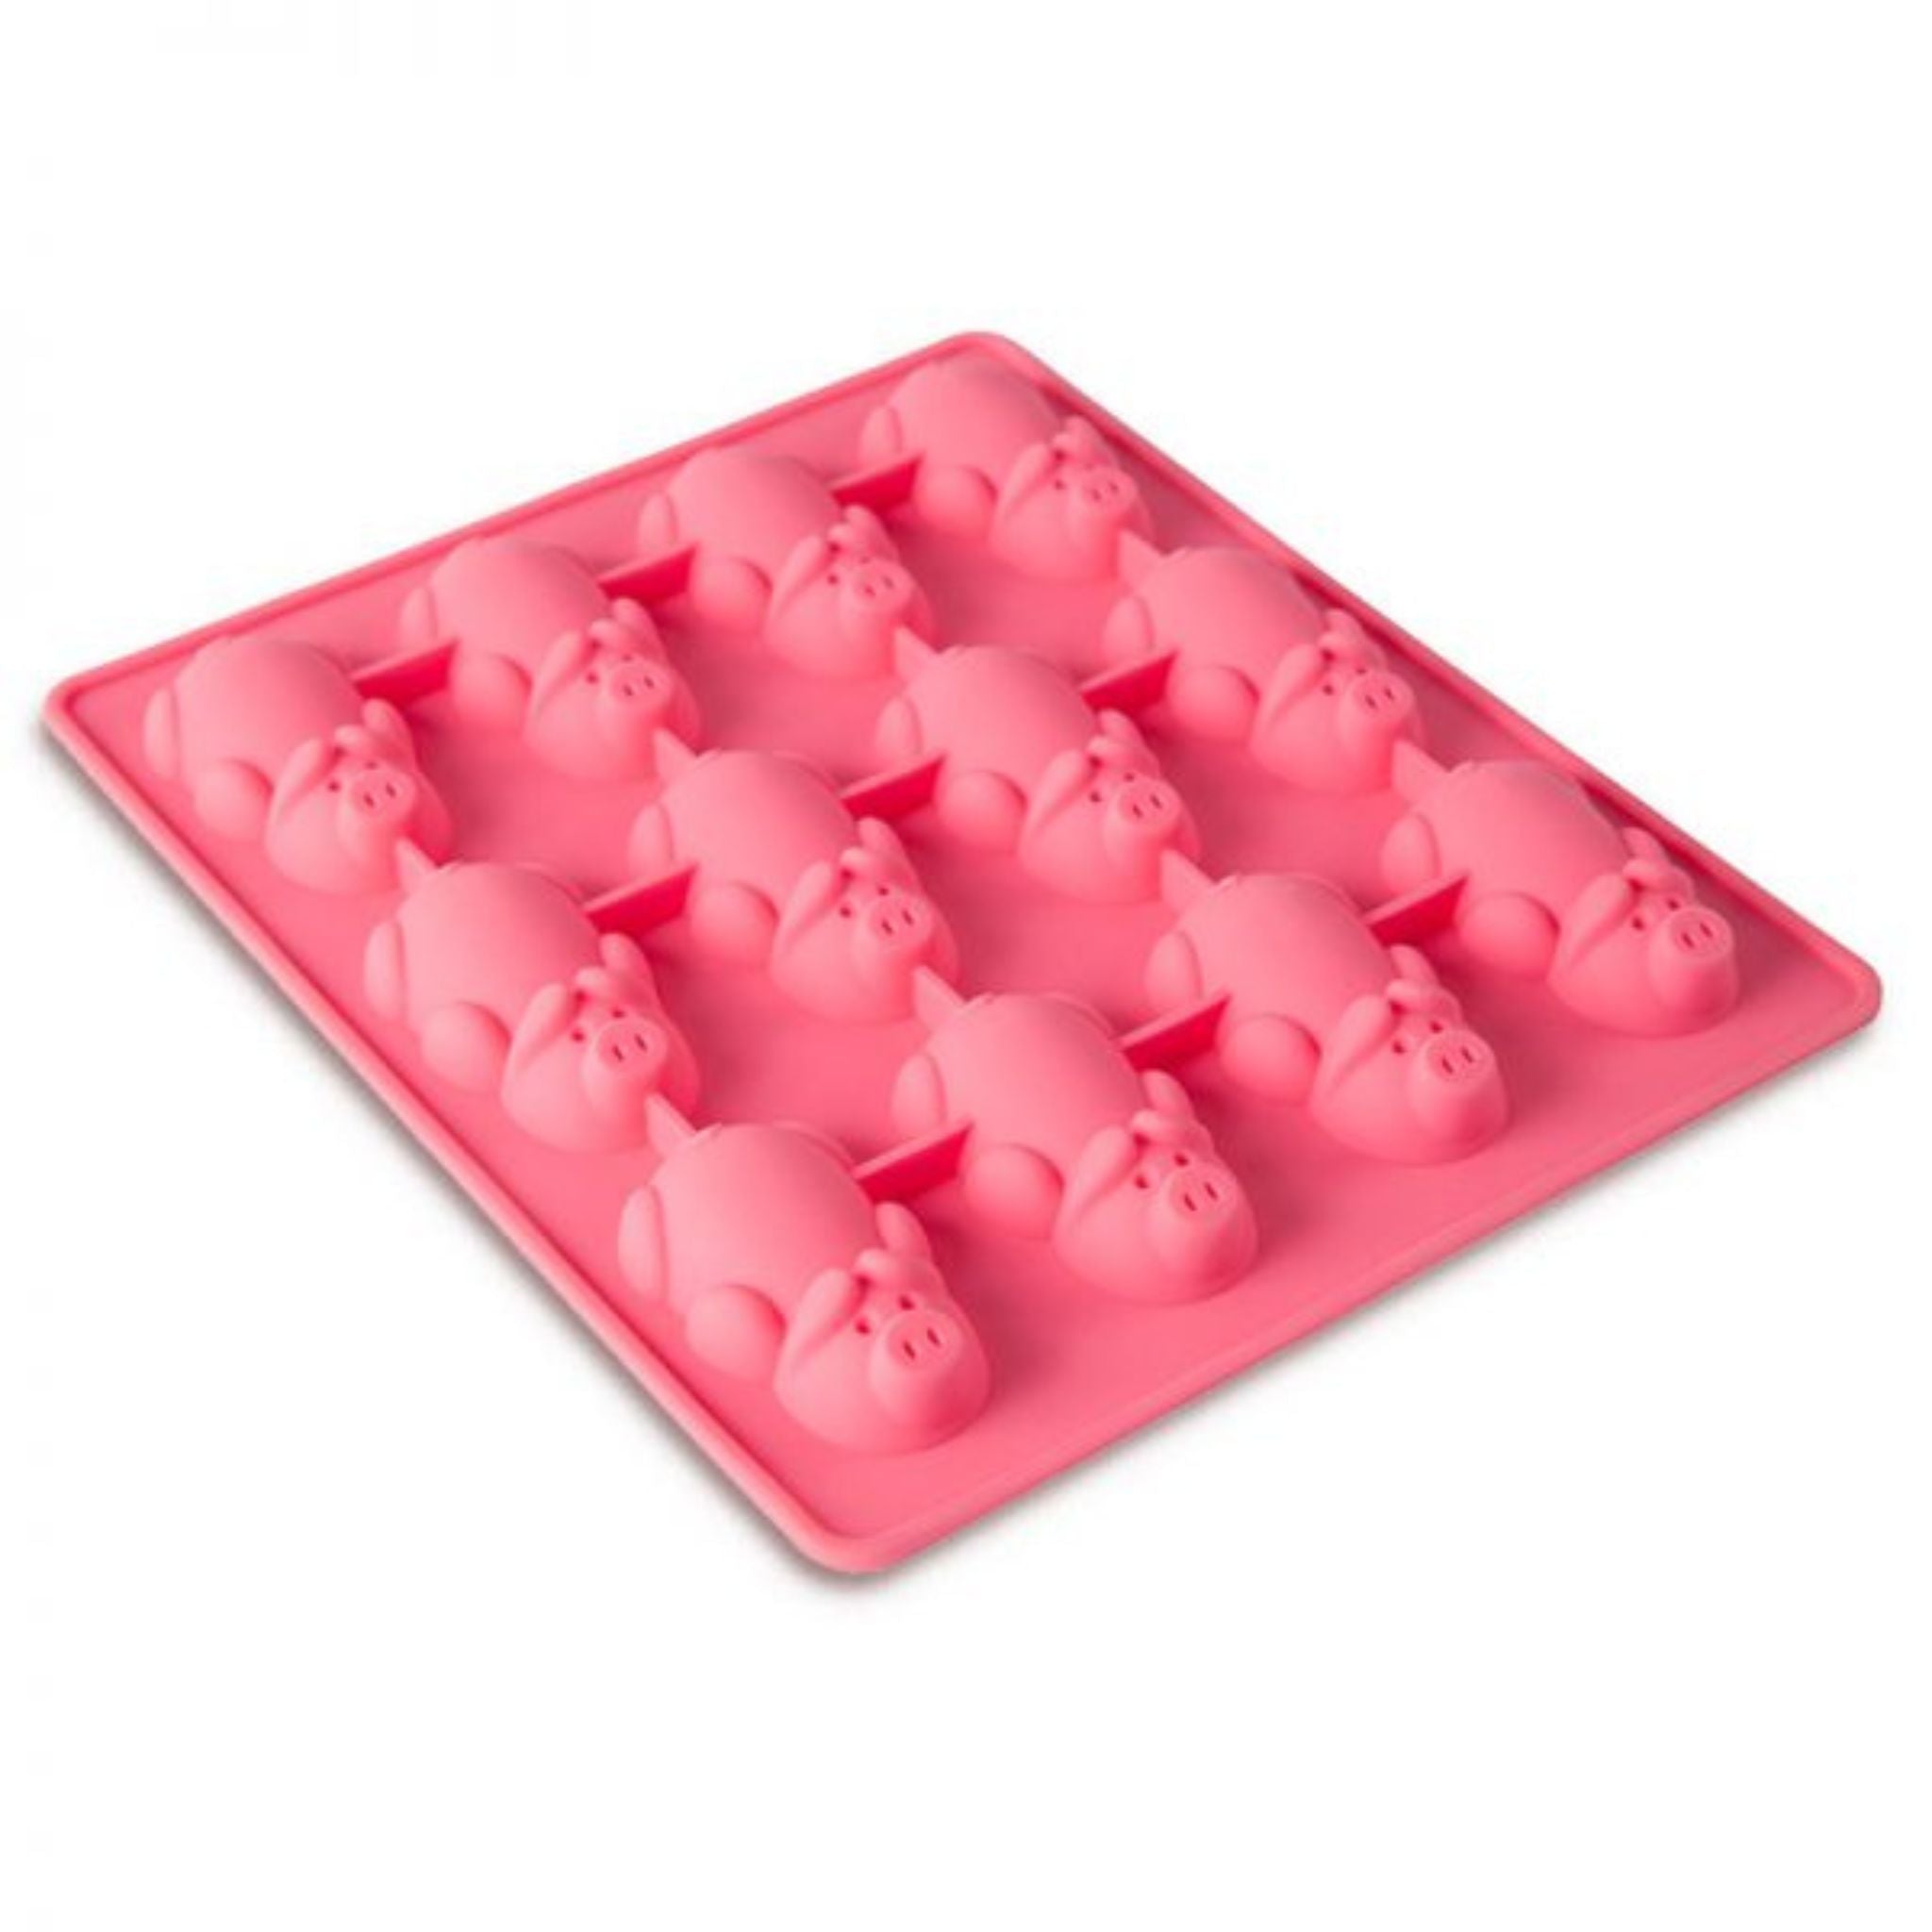 Oven Safe Silicone Mold - Pigs